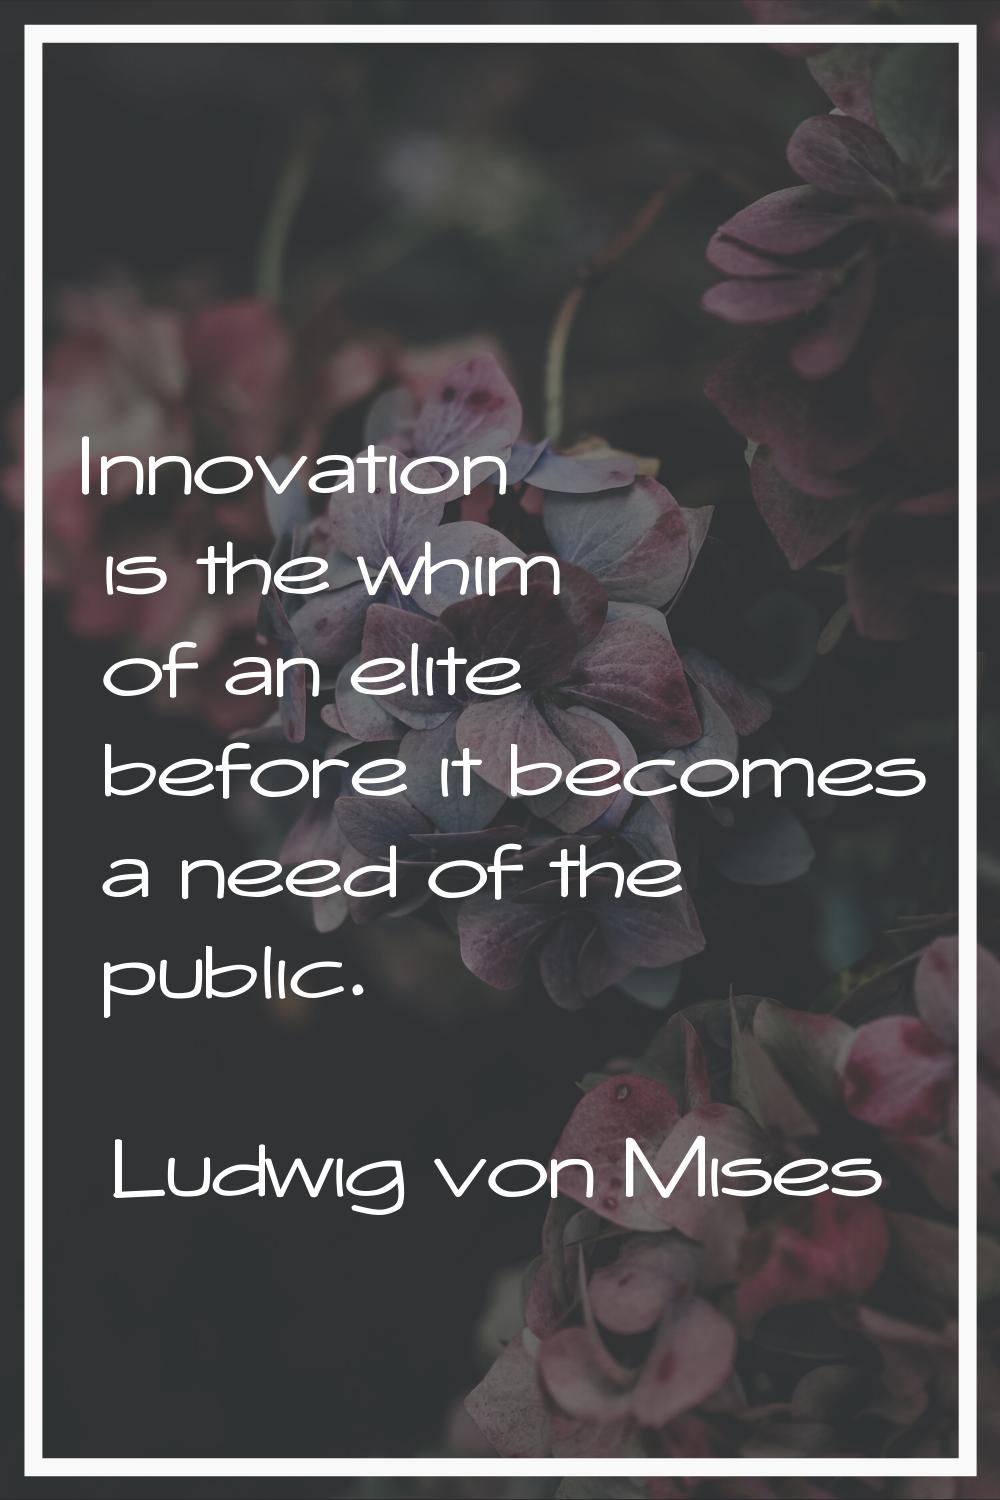 Innovation is the whim of an elite before it becomes a need of the public.